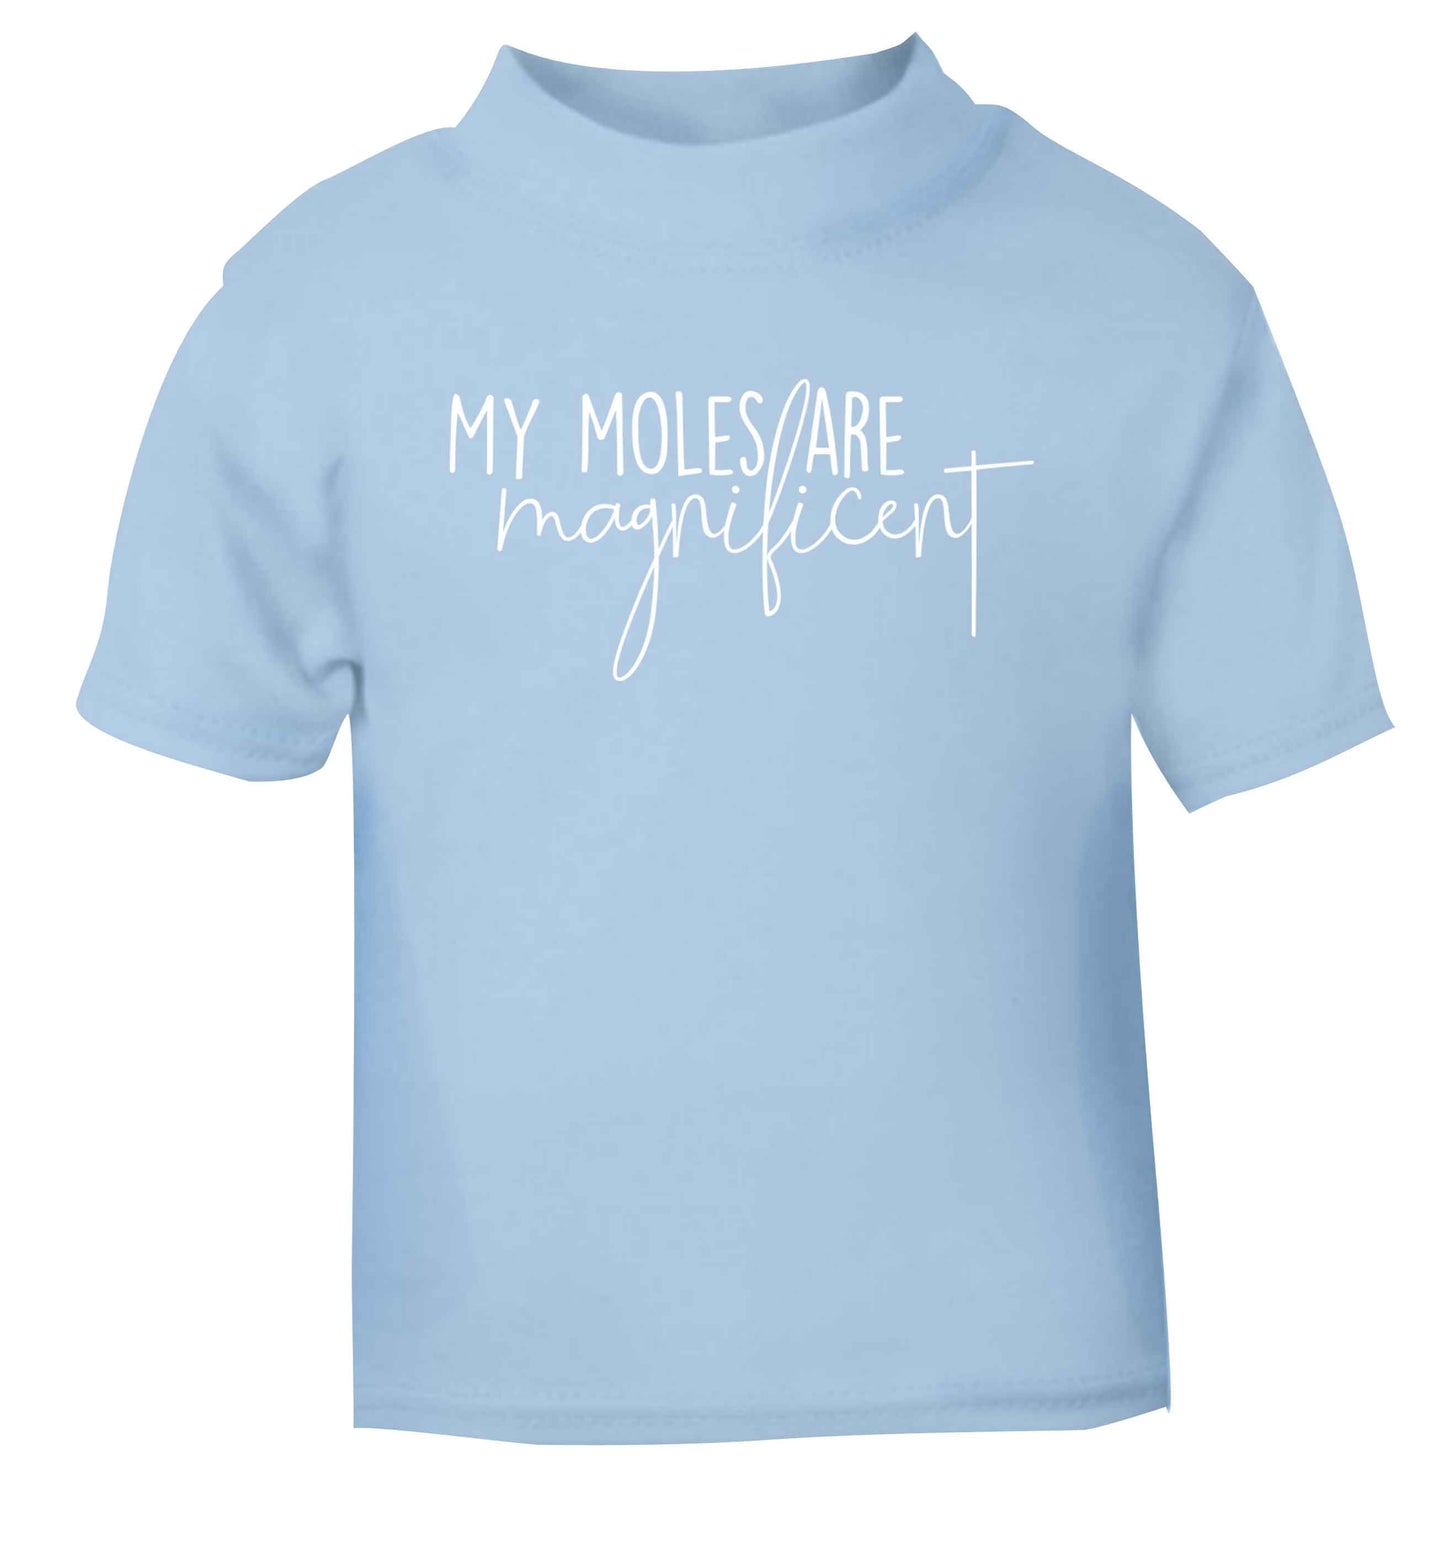 My moles are magnificent light blue baby toddler Tshirt 2 Years